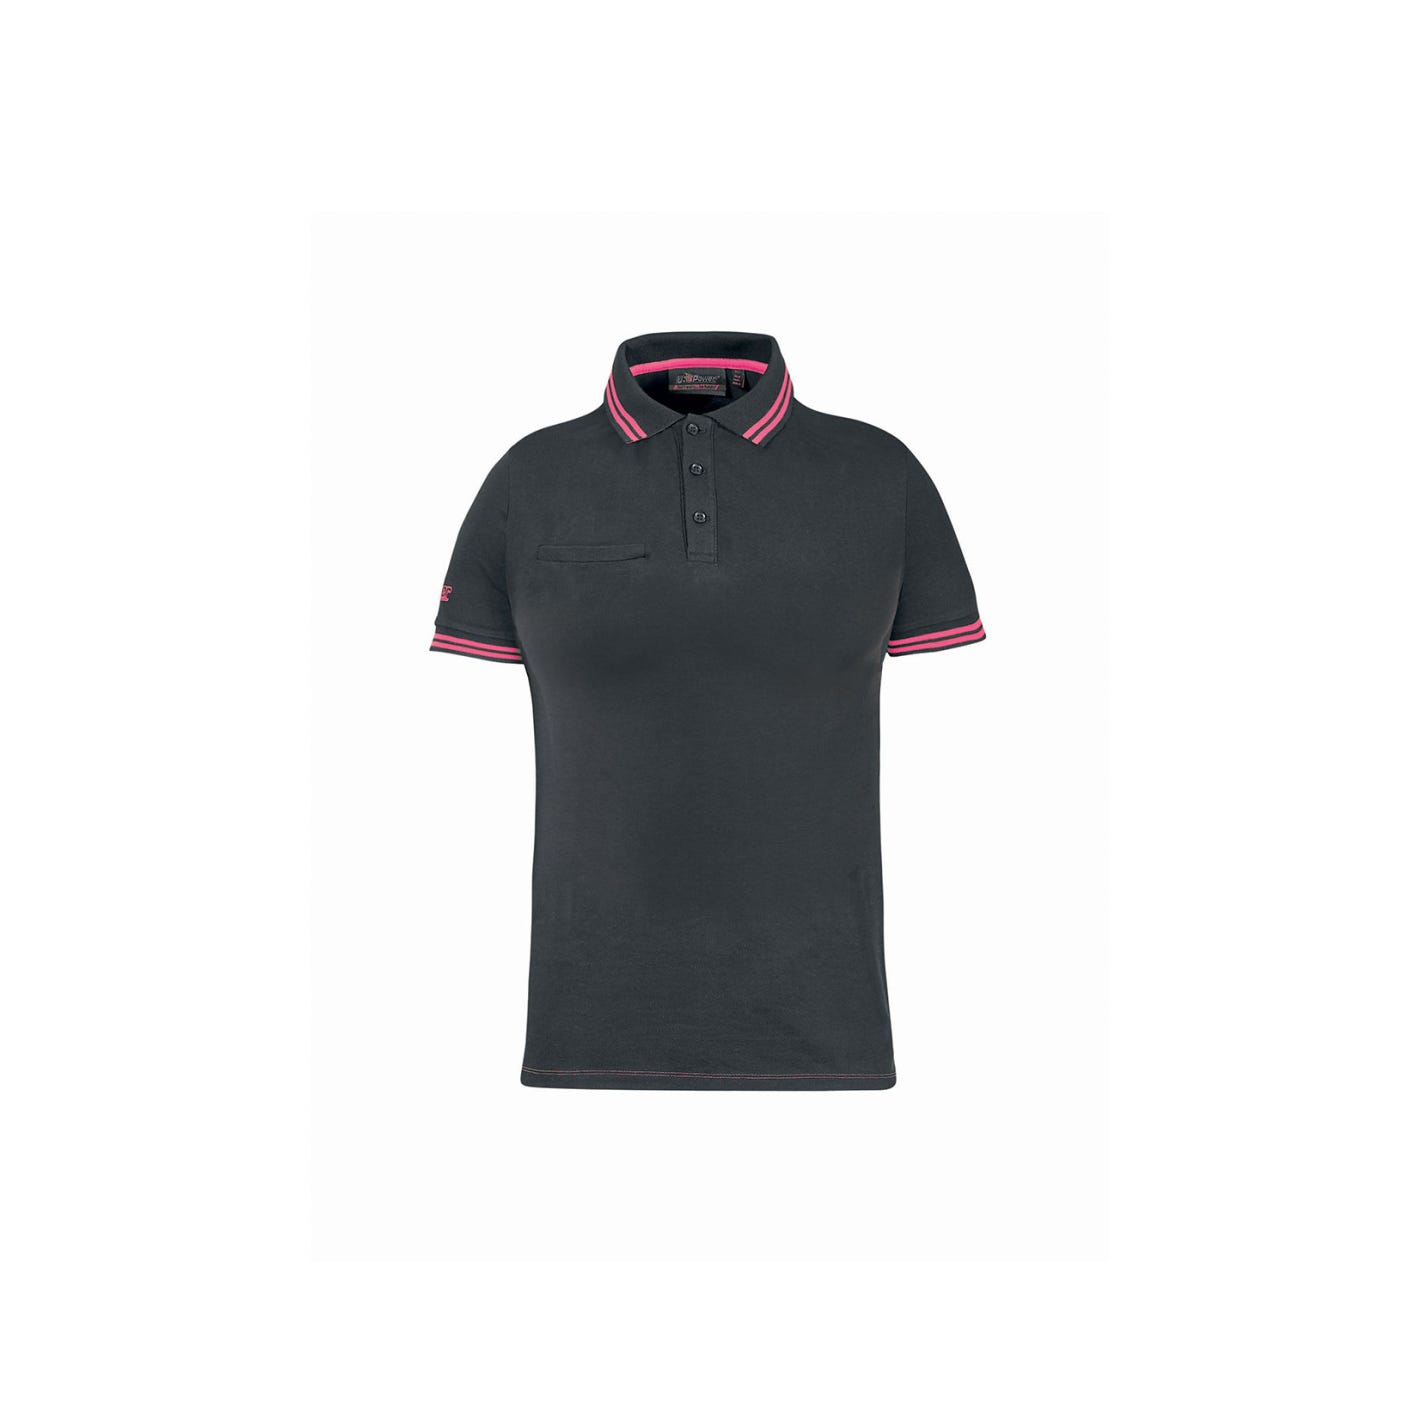 Polo manches courtes femme WAY LADY Grey Fucsia | EY264GF - Upower 0